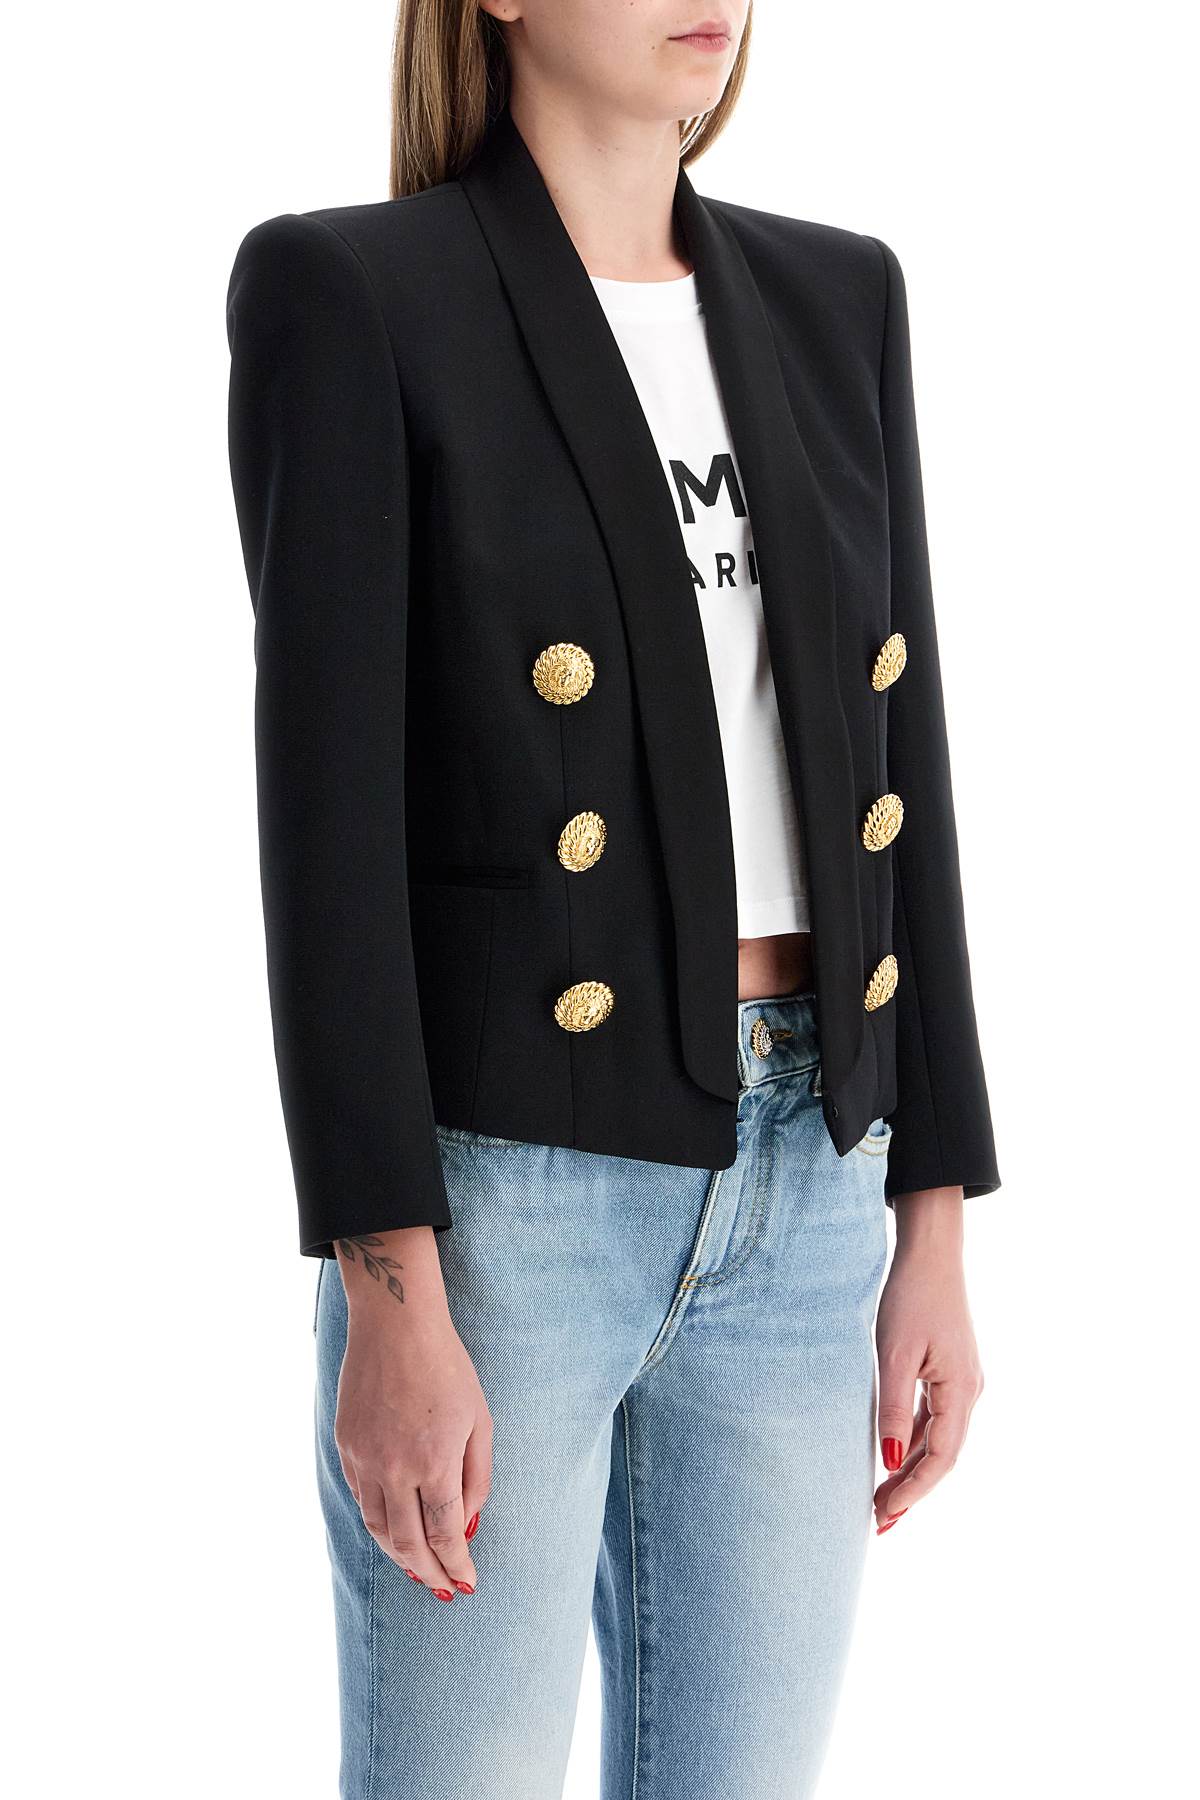 Balmain "6 Button Spencer Jacketreplace With Double Quote   Black